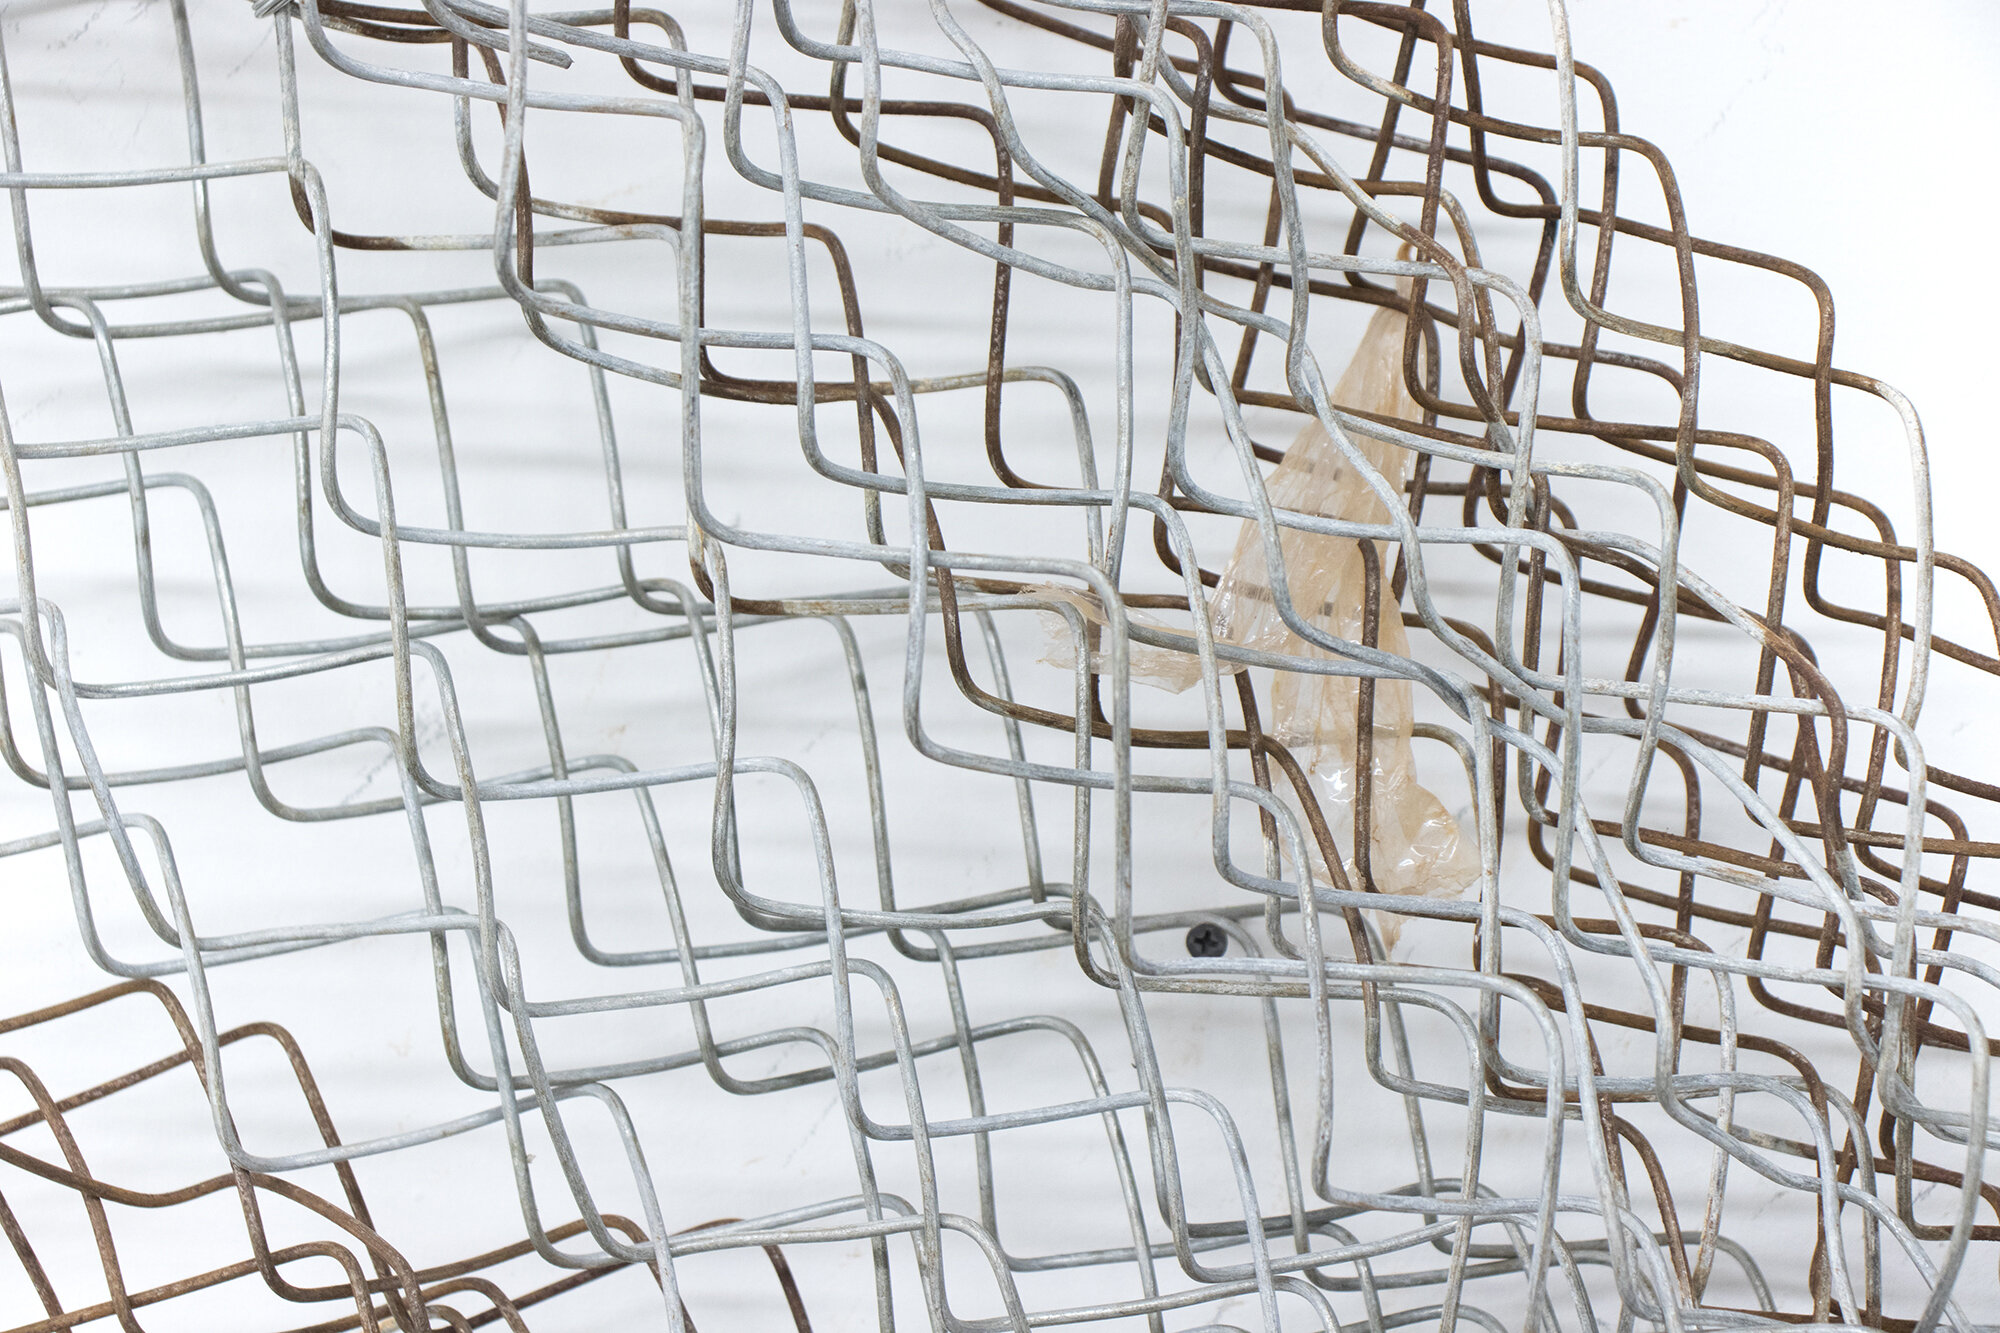  Sean Donovan  Untitled , 2018 (detail) acid soaked galvanized chain-link fencing, screws 83 x 72 x 9 inches (211 x 183 x 23 cm) (SD46) 